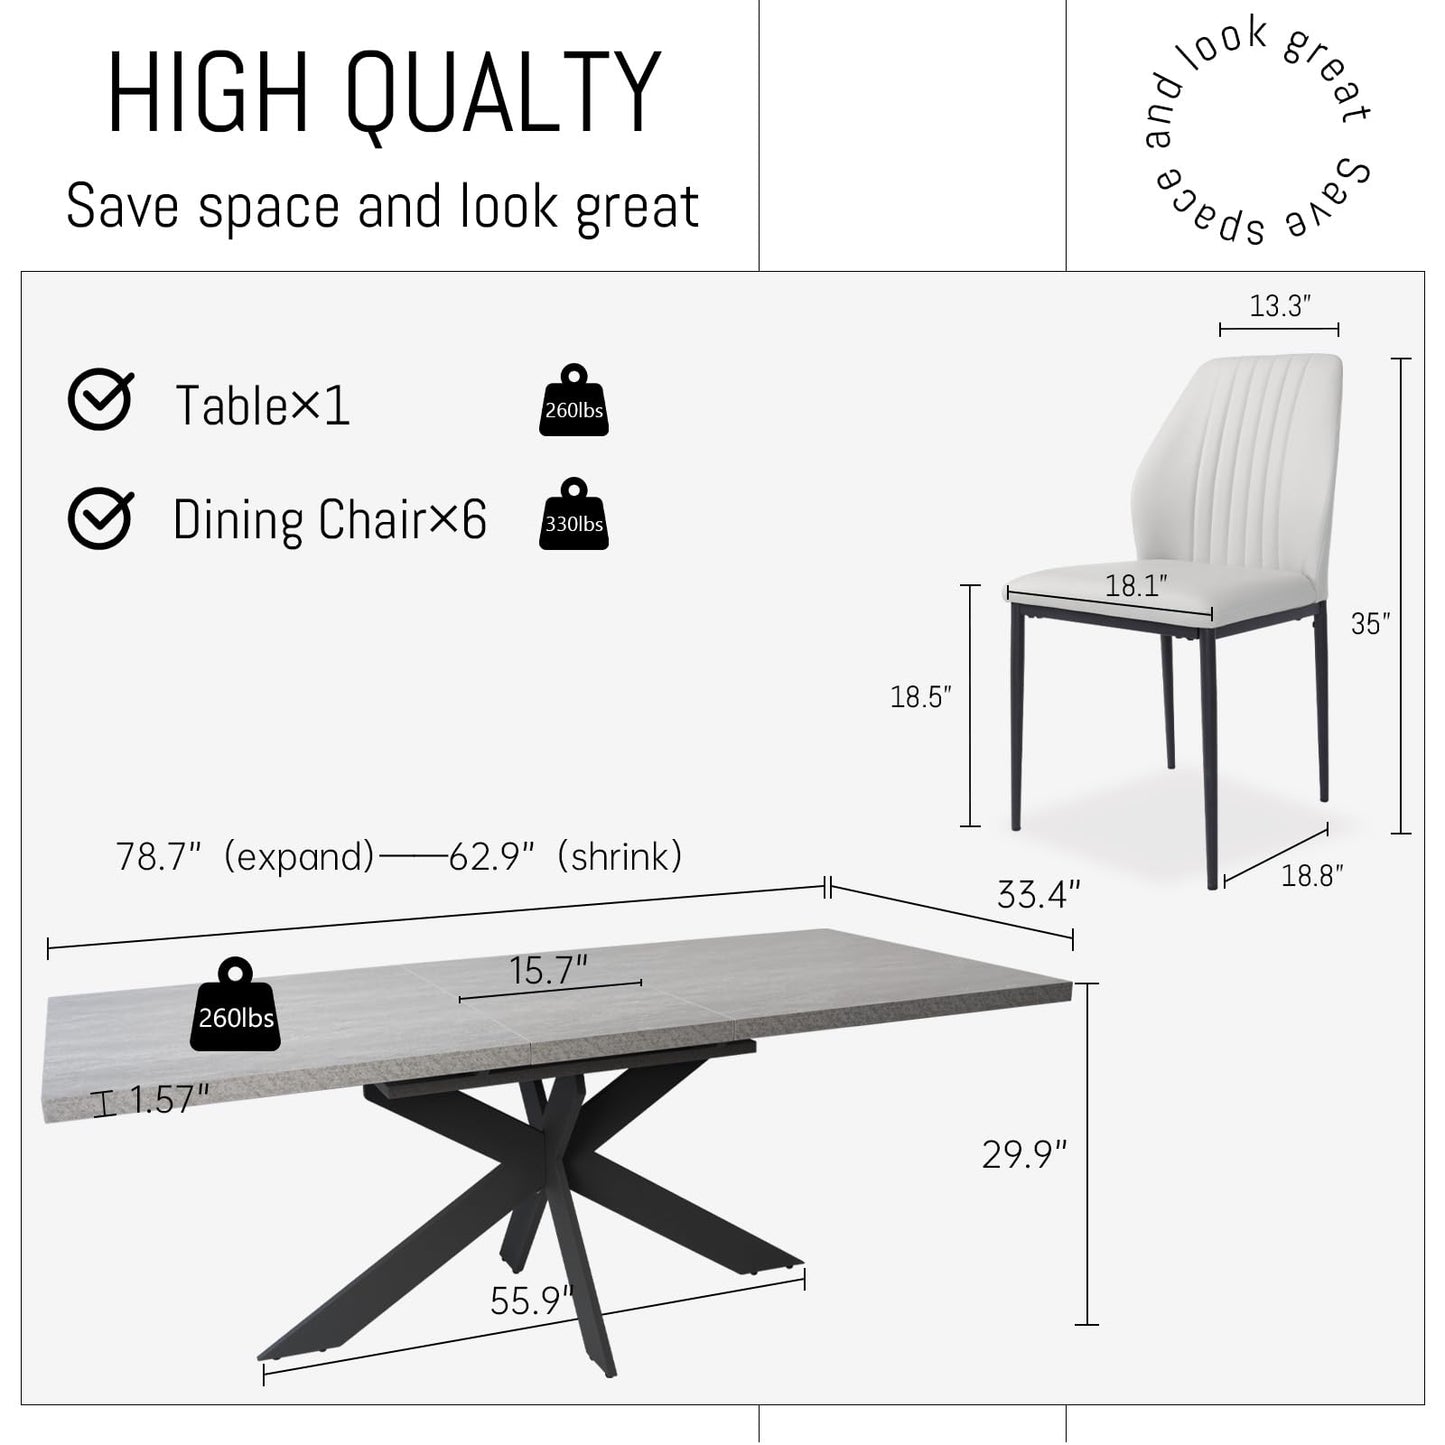 ZckyCine 6-8 People Modern Dining Table Rectangular Kitchen Dining Table Space-Saving Expandable Dining Table Metal Frame (Gray Table + 6 White Chairs)